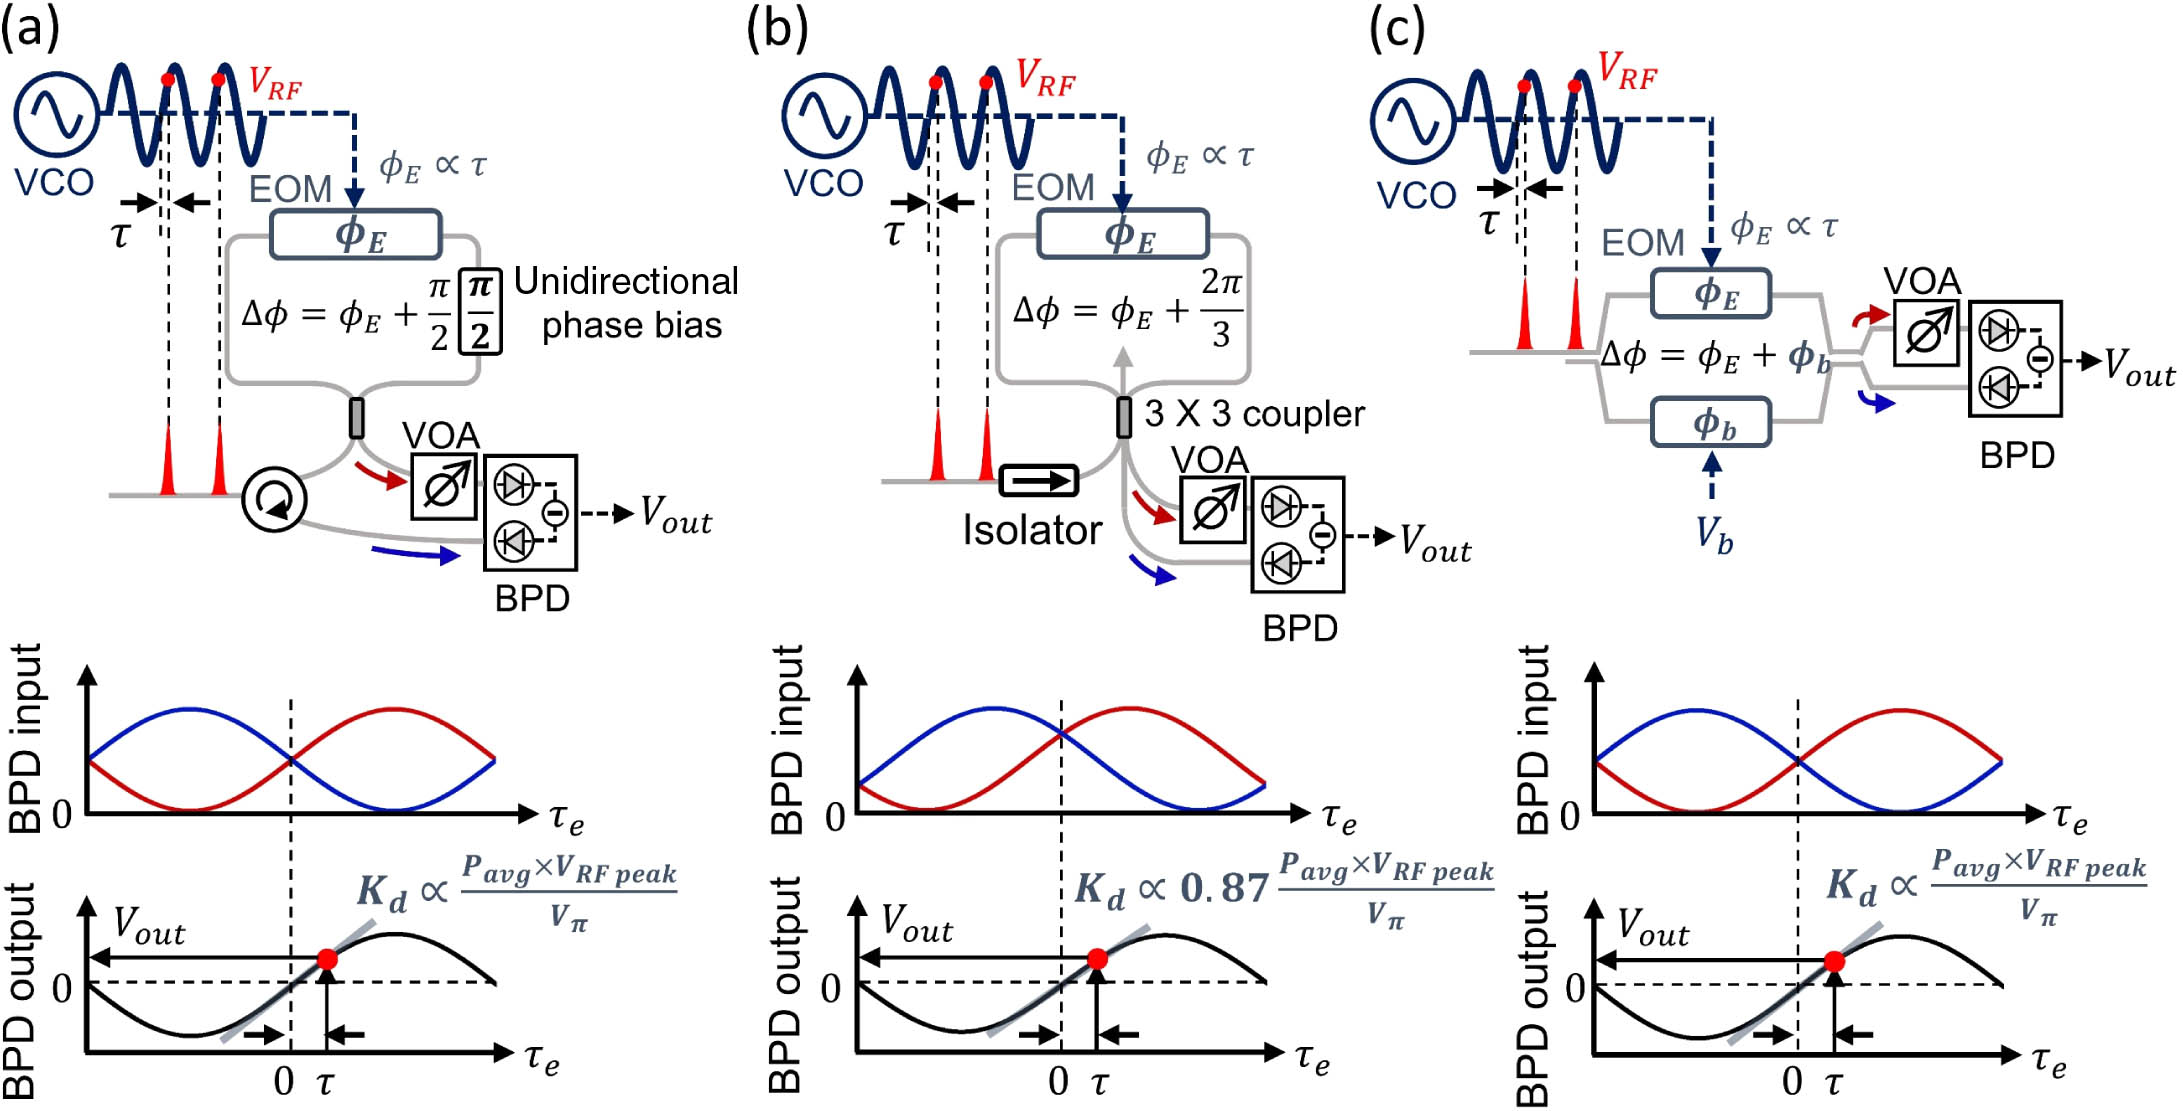 Schematic of EOS-TDs. (a) Sagnac-loop-based EOS-TD with unidirectional phase bias, (b) 3×3 optical coupler-based EOS-TD, (c) DO-MZM-based EOS-TD. VCO, voltage-controlled oscillator; BPD, balanced photodetector; EOM, electro-optic phase modulator; VOA, variable optical attenuator.